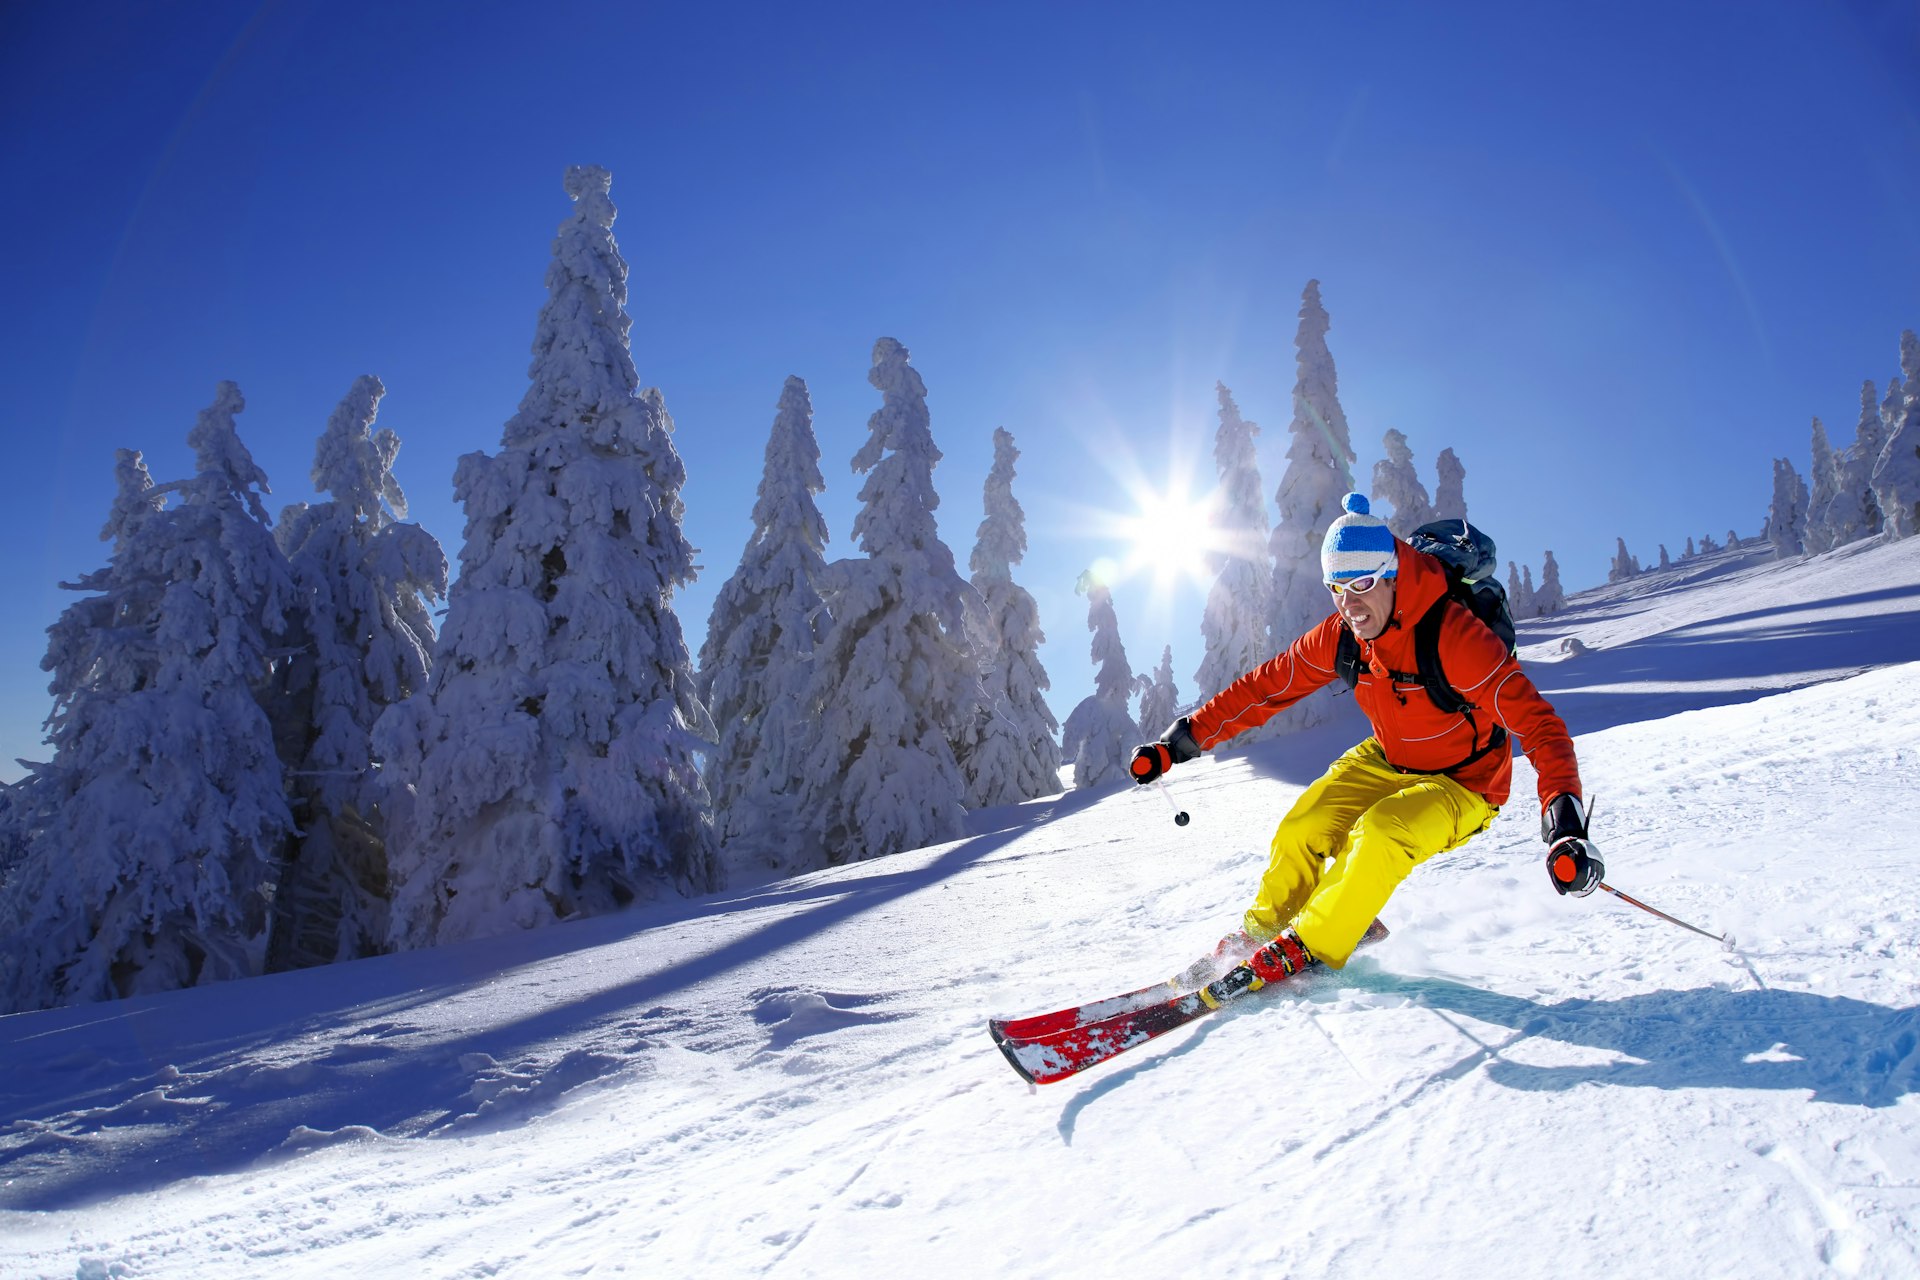 A skier skiing downhill in high mountains against sunshine